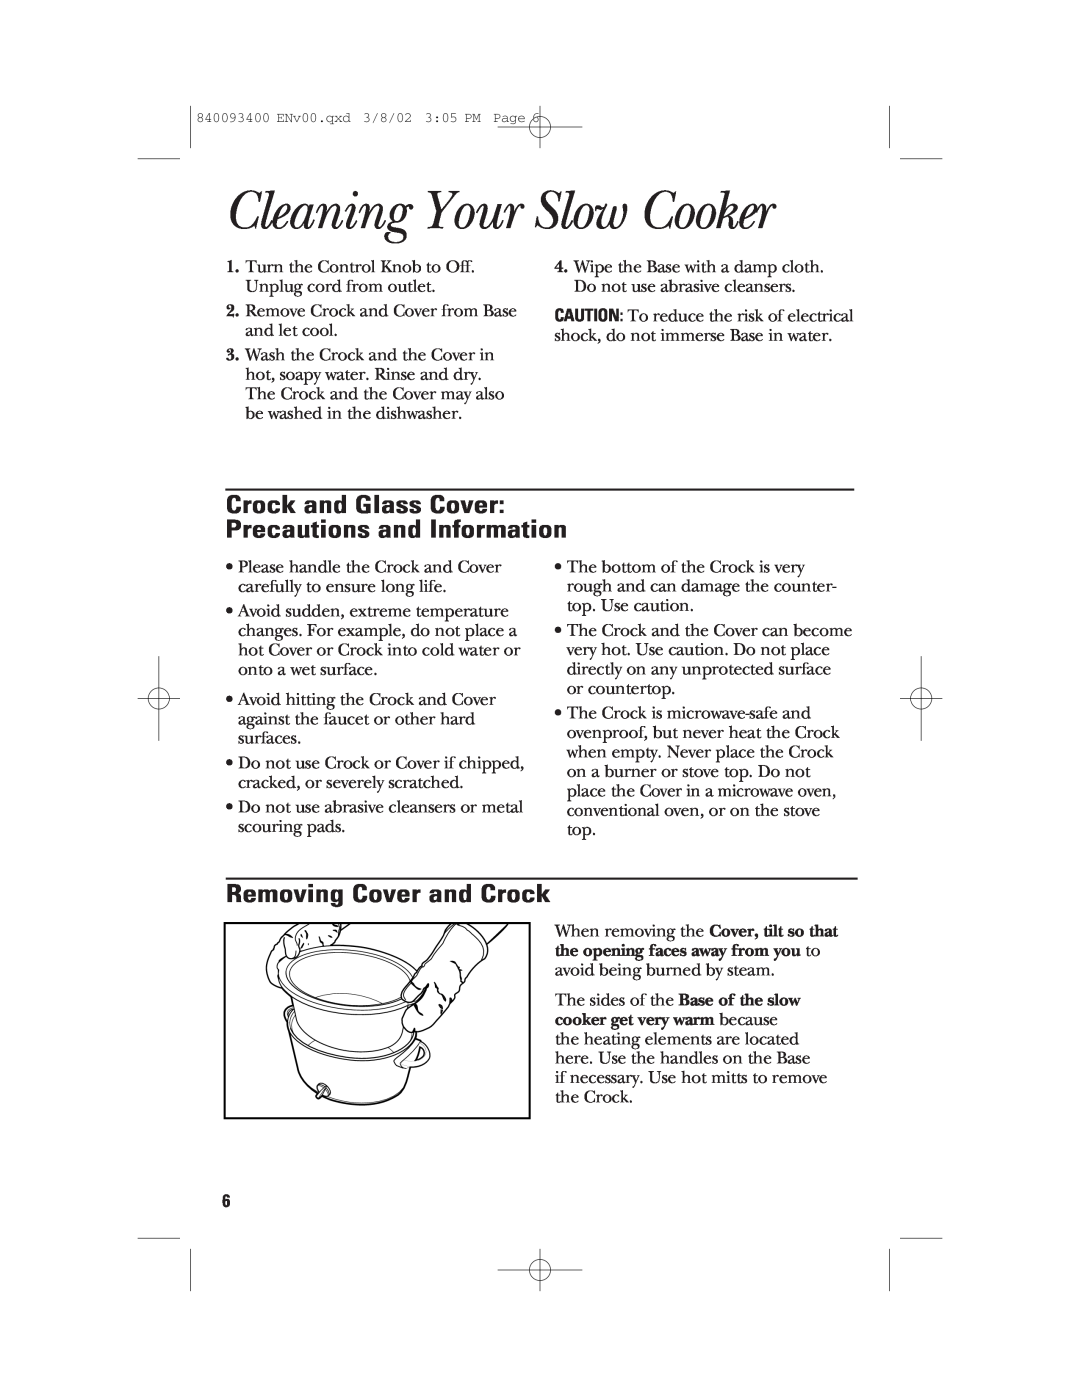 GE 106724 manual Cleaning Your Slow Cooker, Crock and Glass Cover Precautions and Information, Removing Cover and Crock 